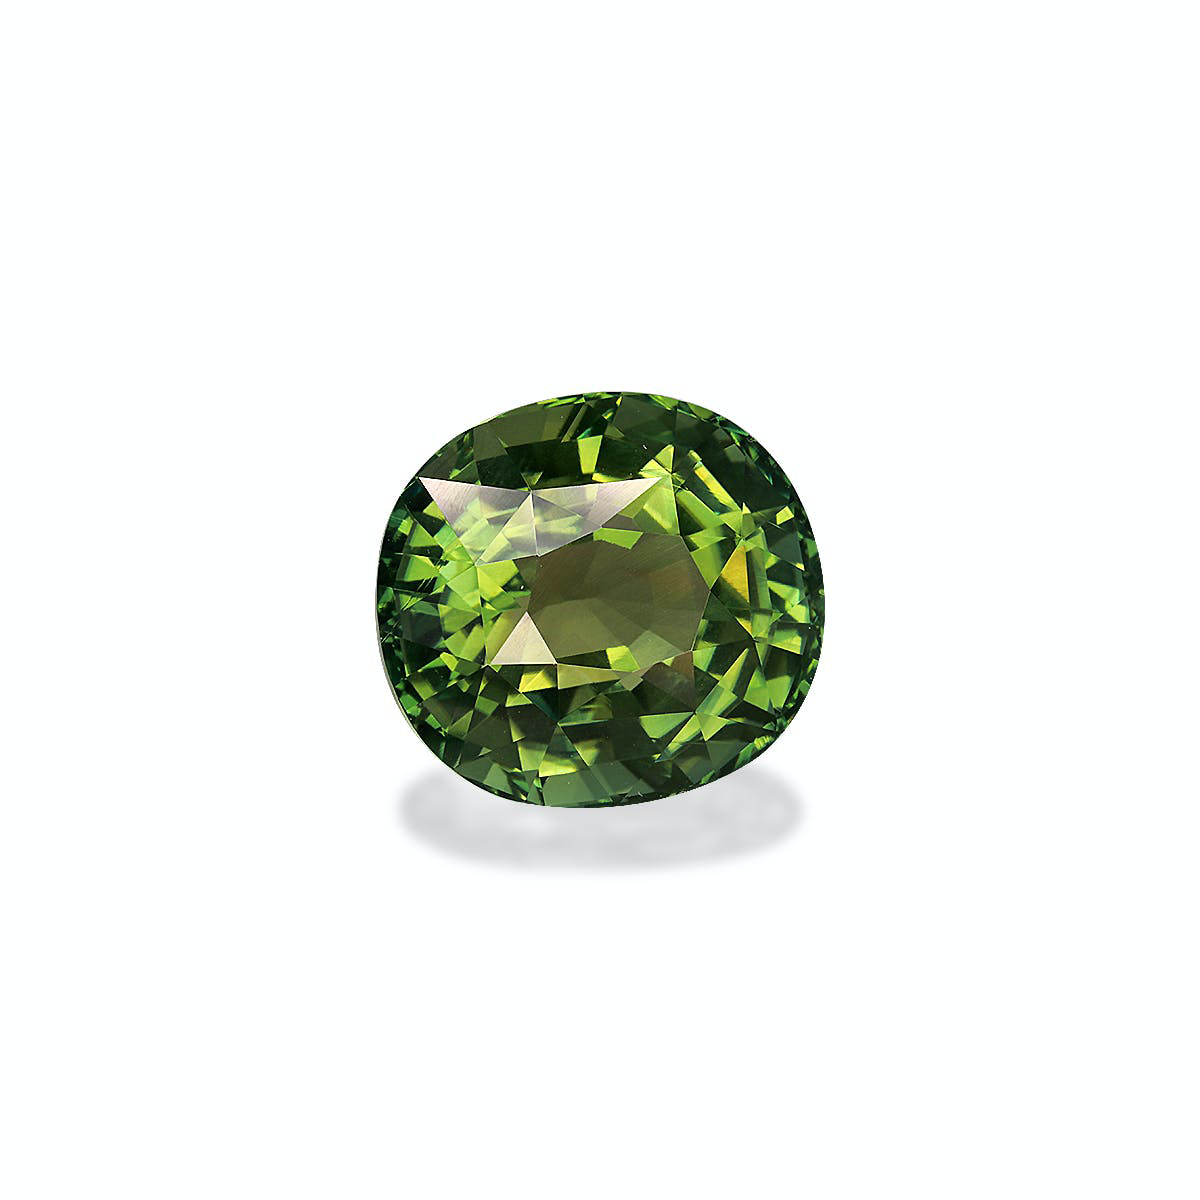 Picture of Green Tourmaline 25.28ct (TG0447)